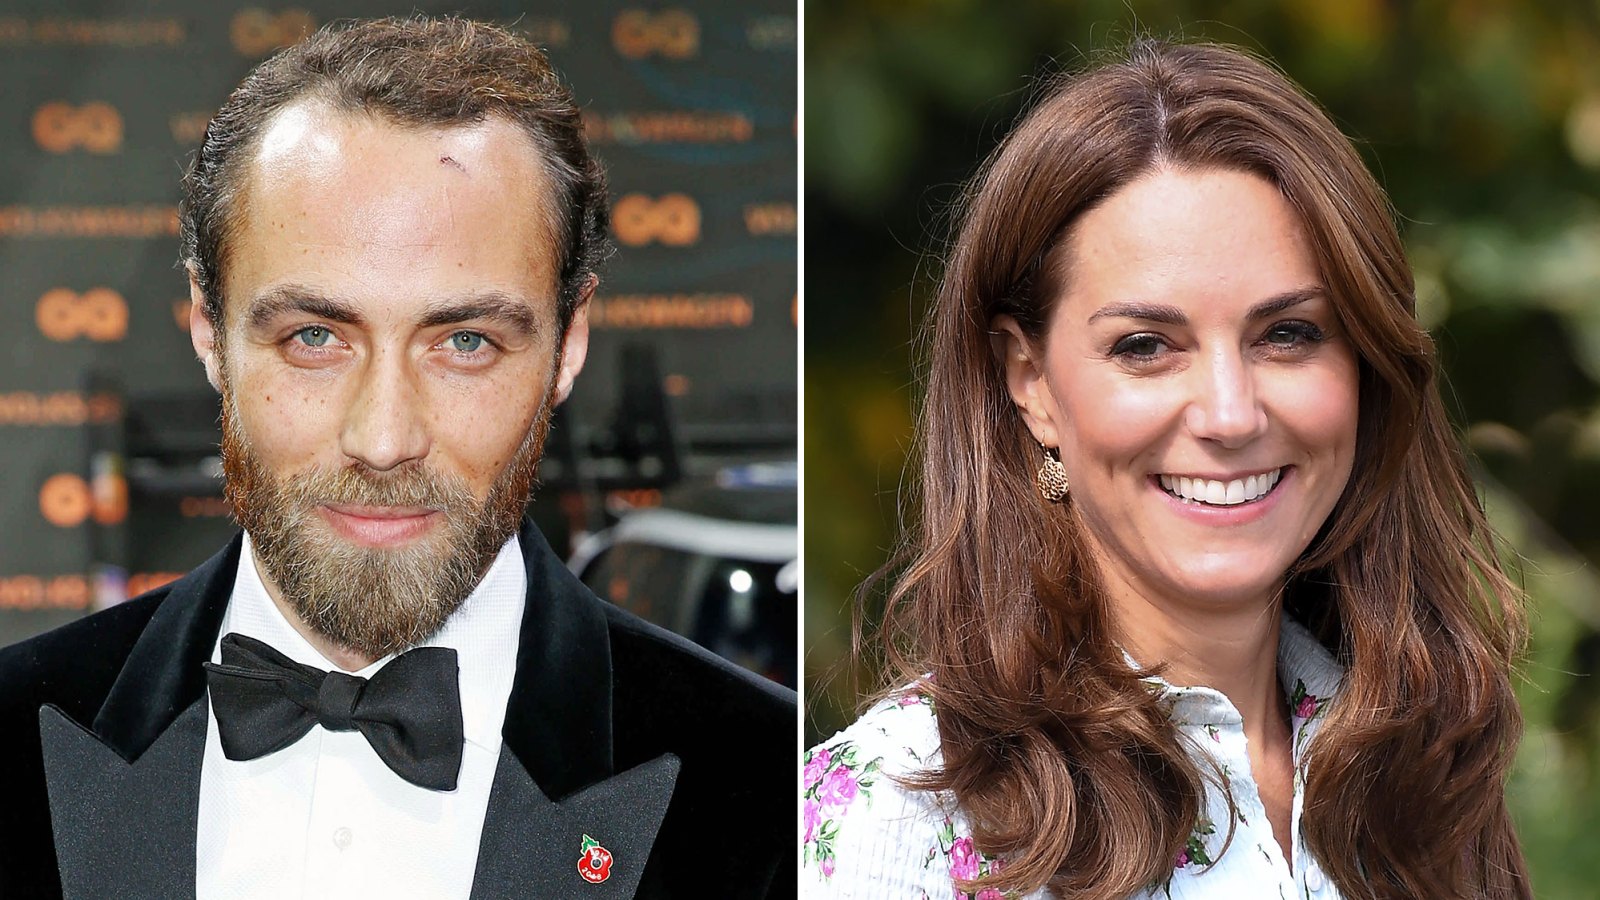 James Middleton Says Sister Duchess Kate Attended Therapy With Him